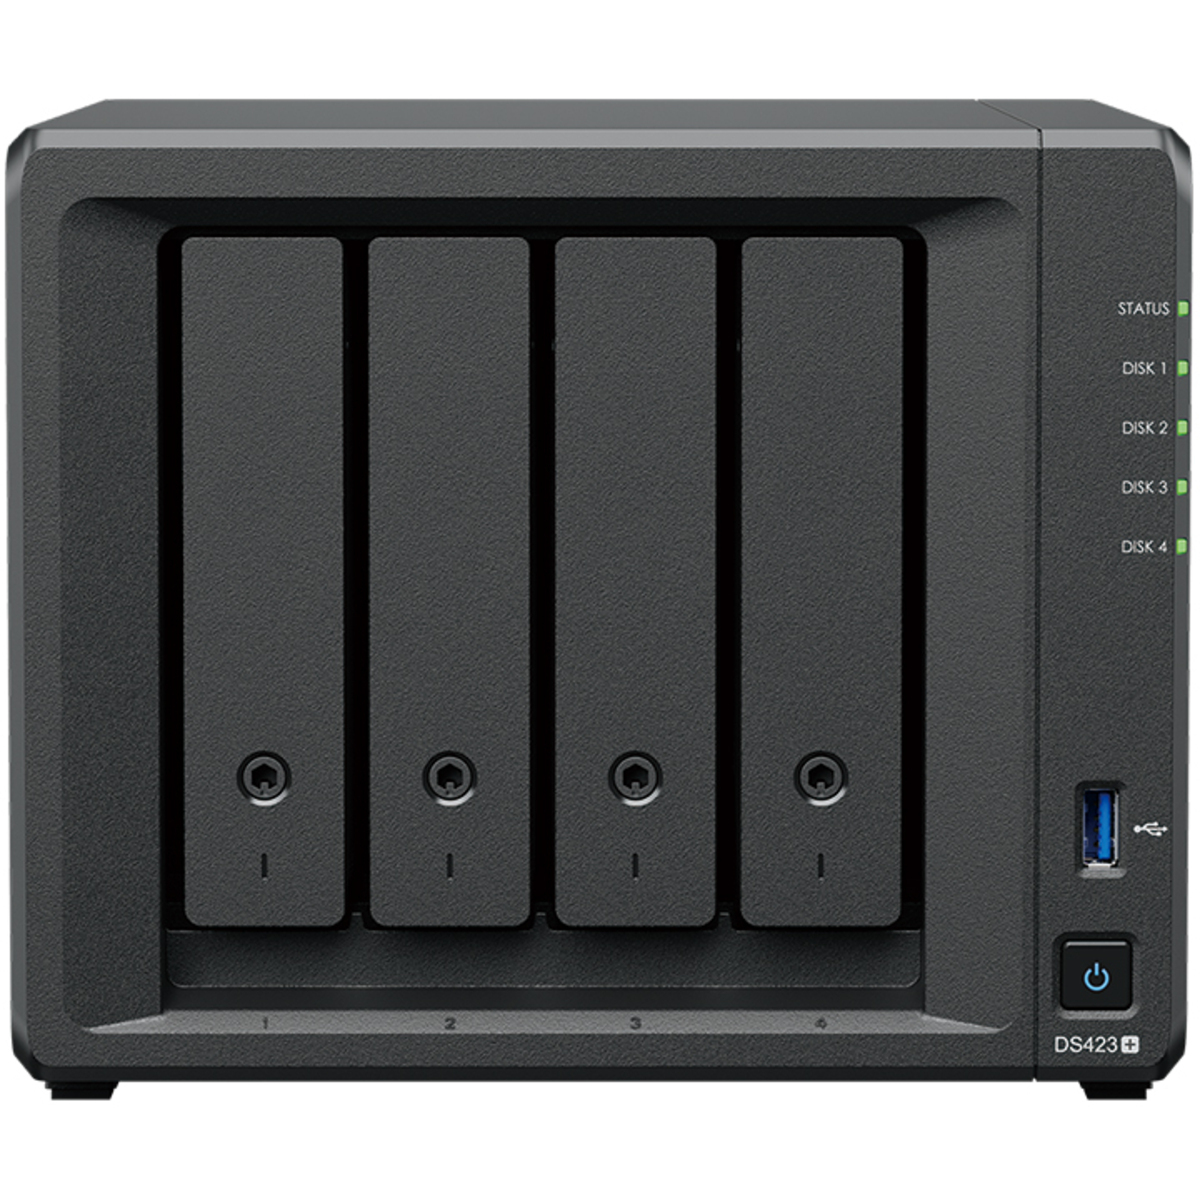 Synology DiskStation DS423+ 42tb 4-Bay Desktop Multimedia / Power User / Business NAS - Network Attached Storage Device 3x14tb Seagate IronWolf Pro ST14000NT001 3.5 7200rpm SATA 6Gb/s HDD NAS Class Drives Installed - Burn-In Tested - FREE RAM UPGRADE DiskStation DS423+